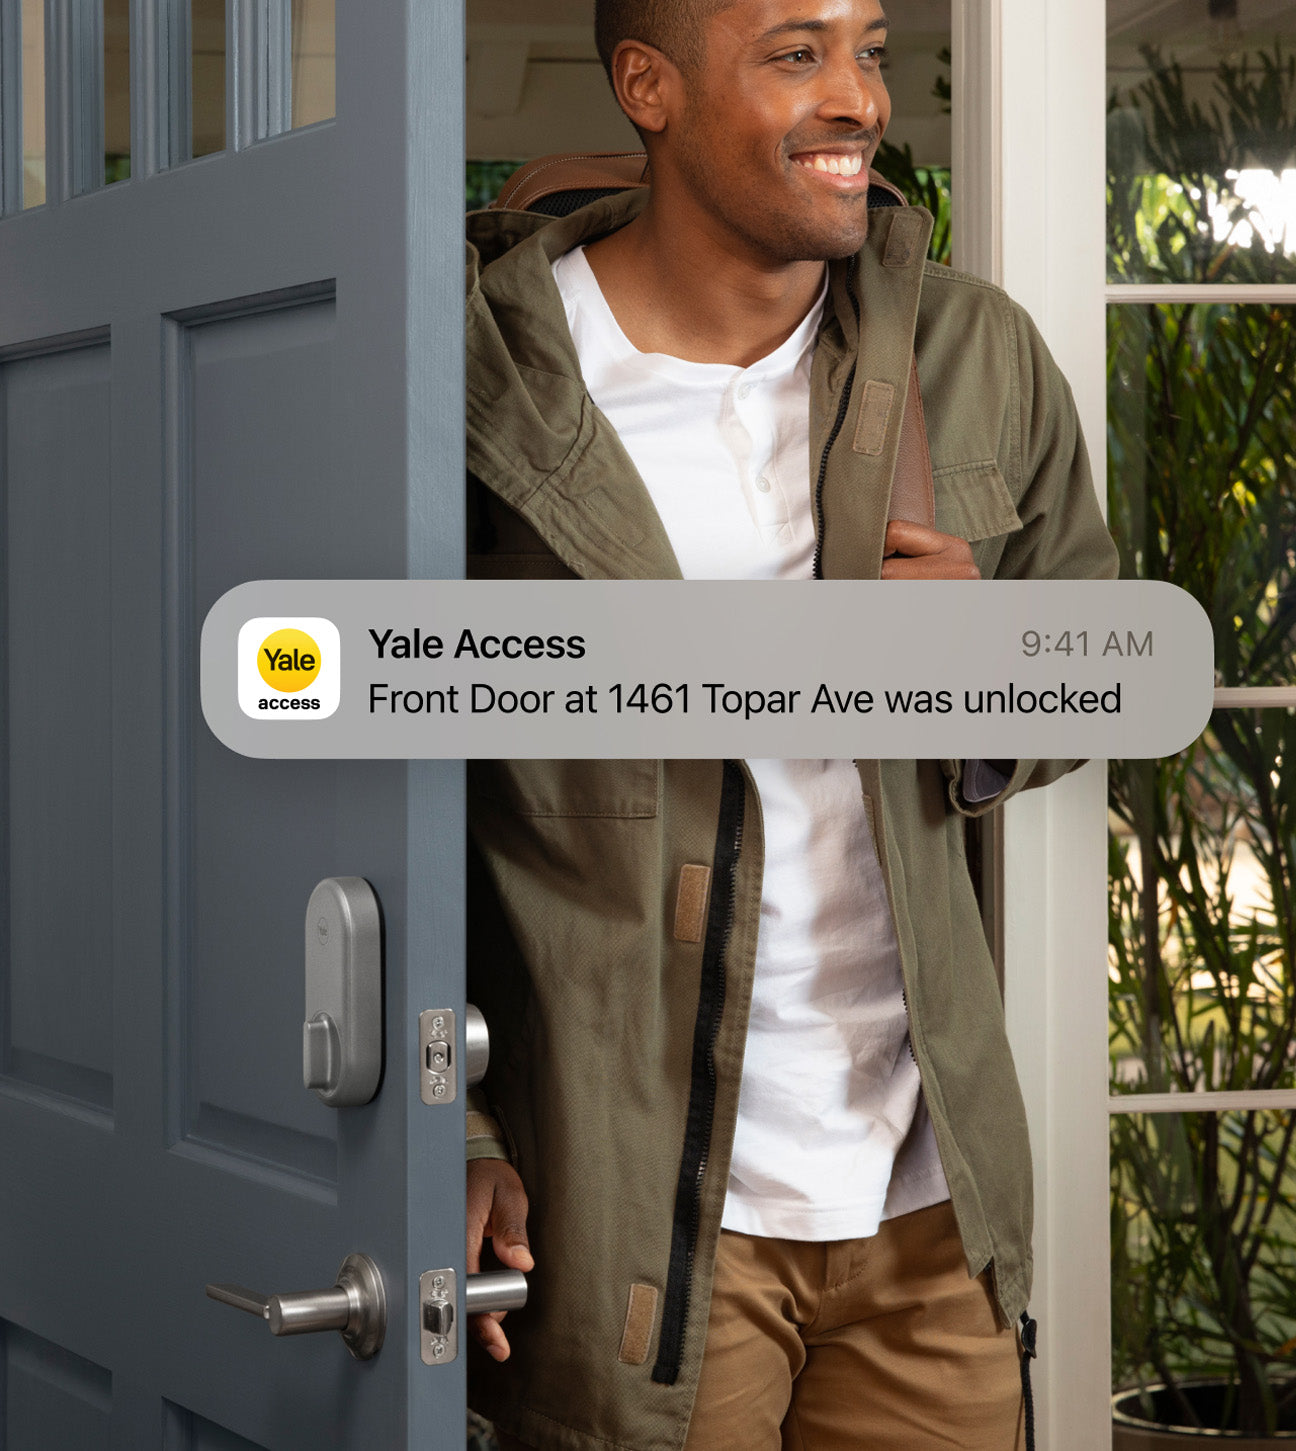 popup showing Yale Access Front Door at 1461 Topar Ave was unlocked